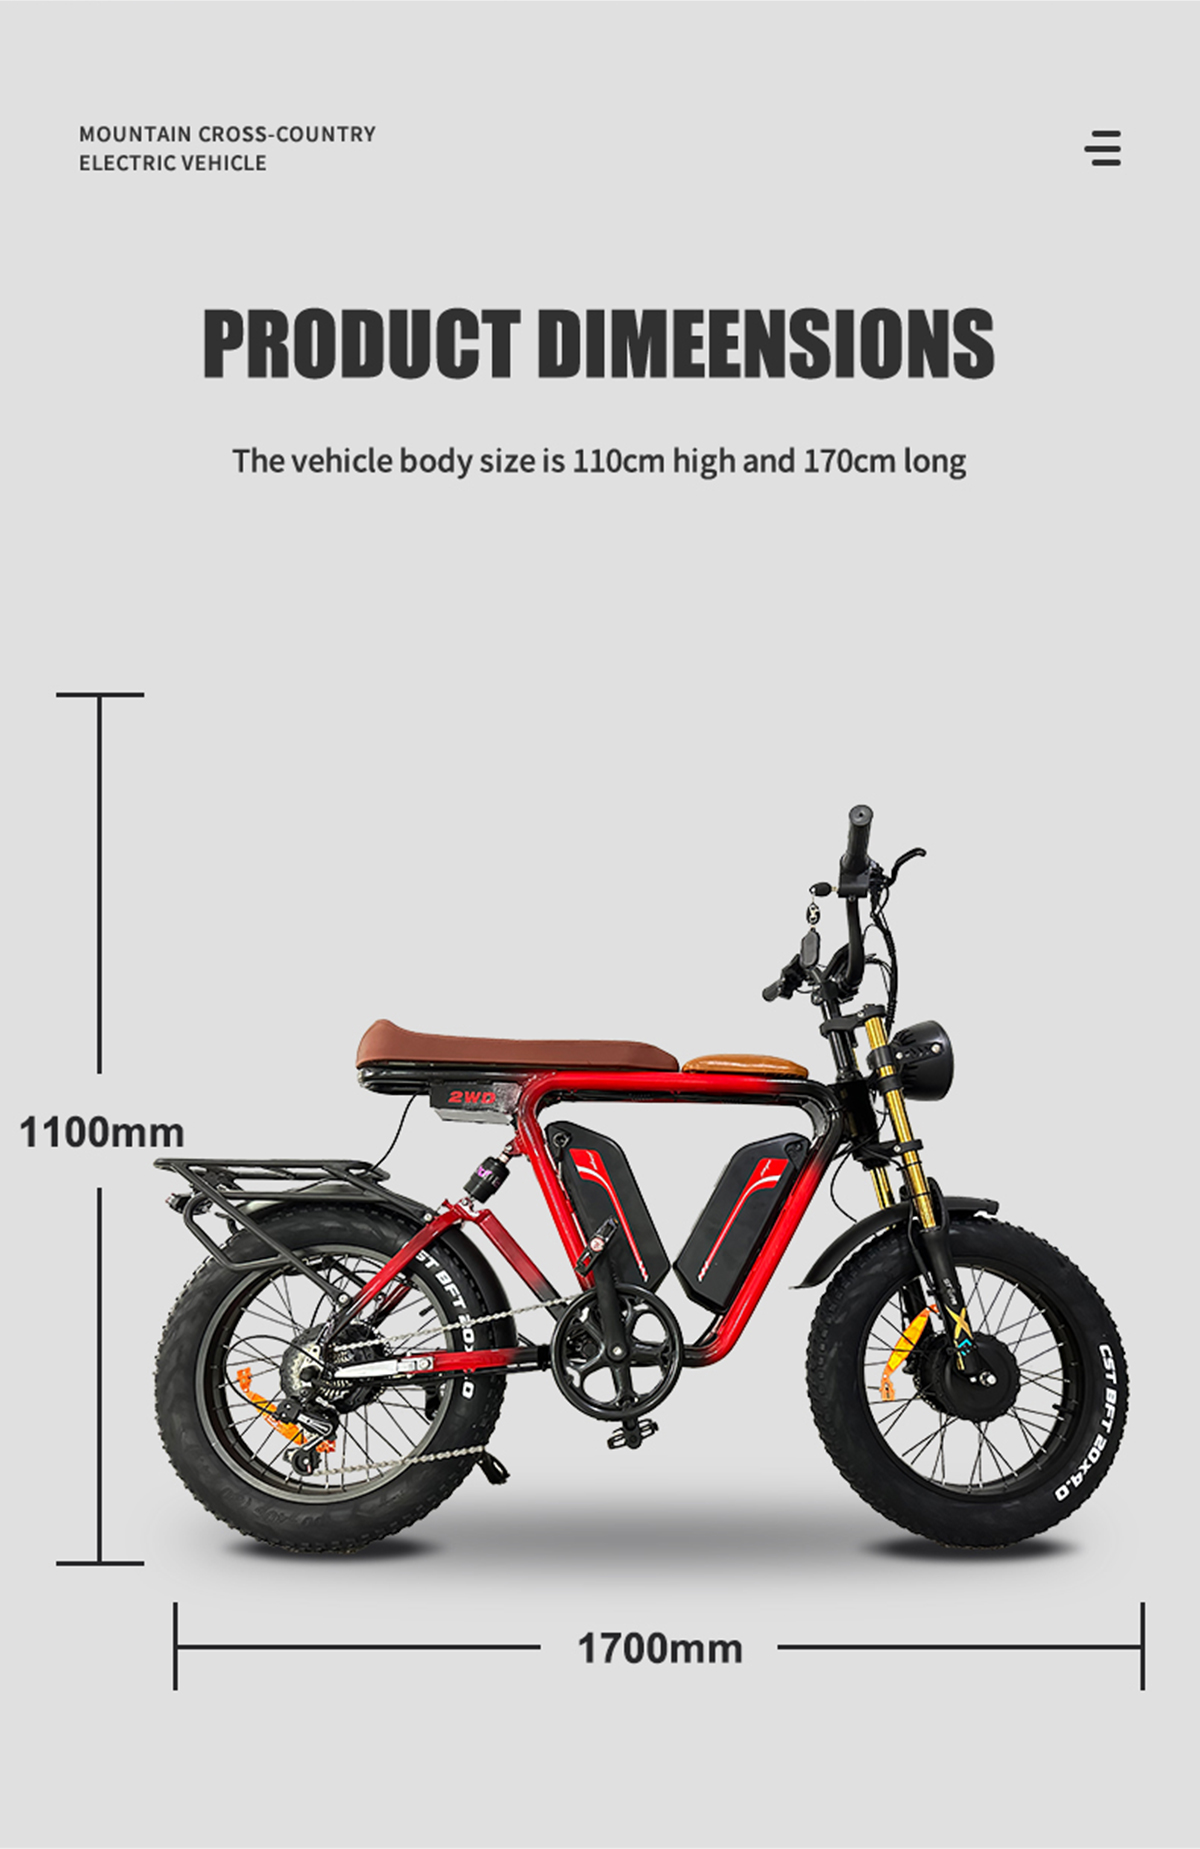 80-90kmPure Electric Cruising Range 55kmh With 5 Speed Electric Bike Details 4